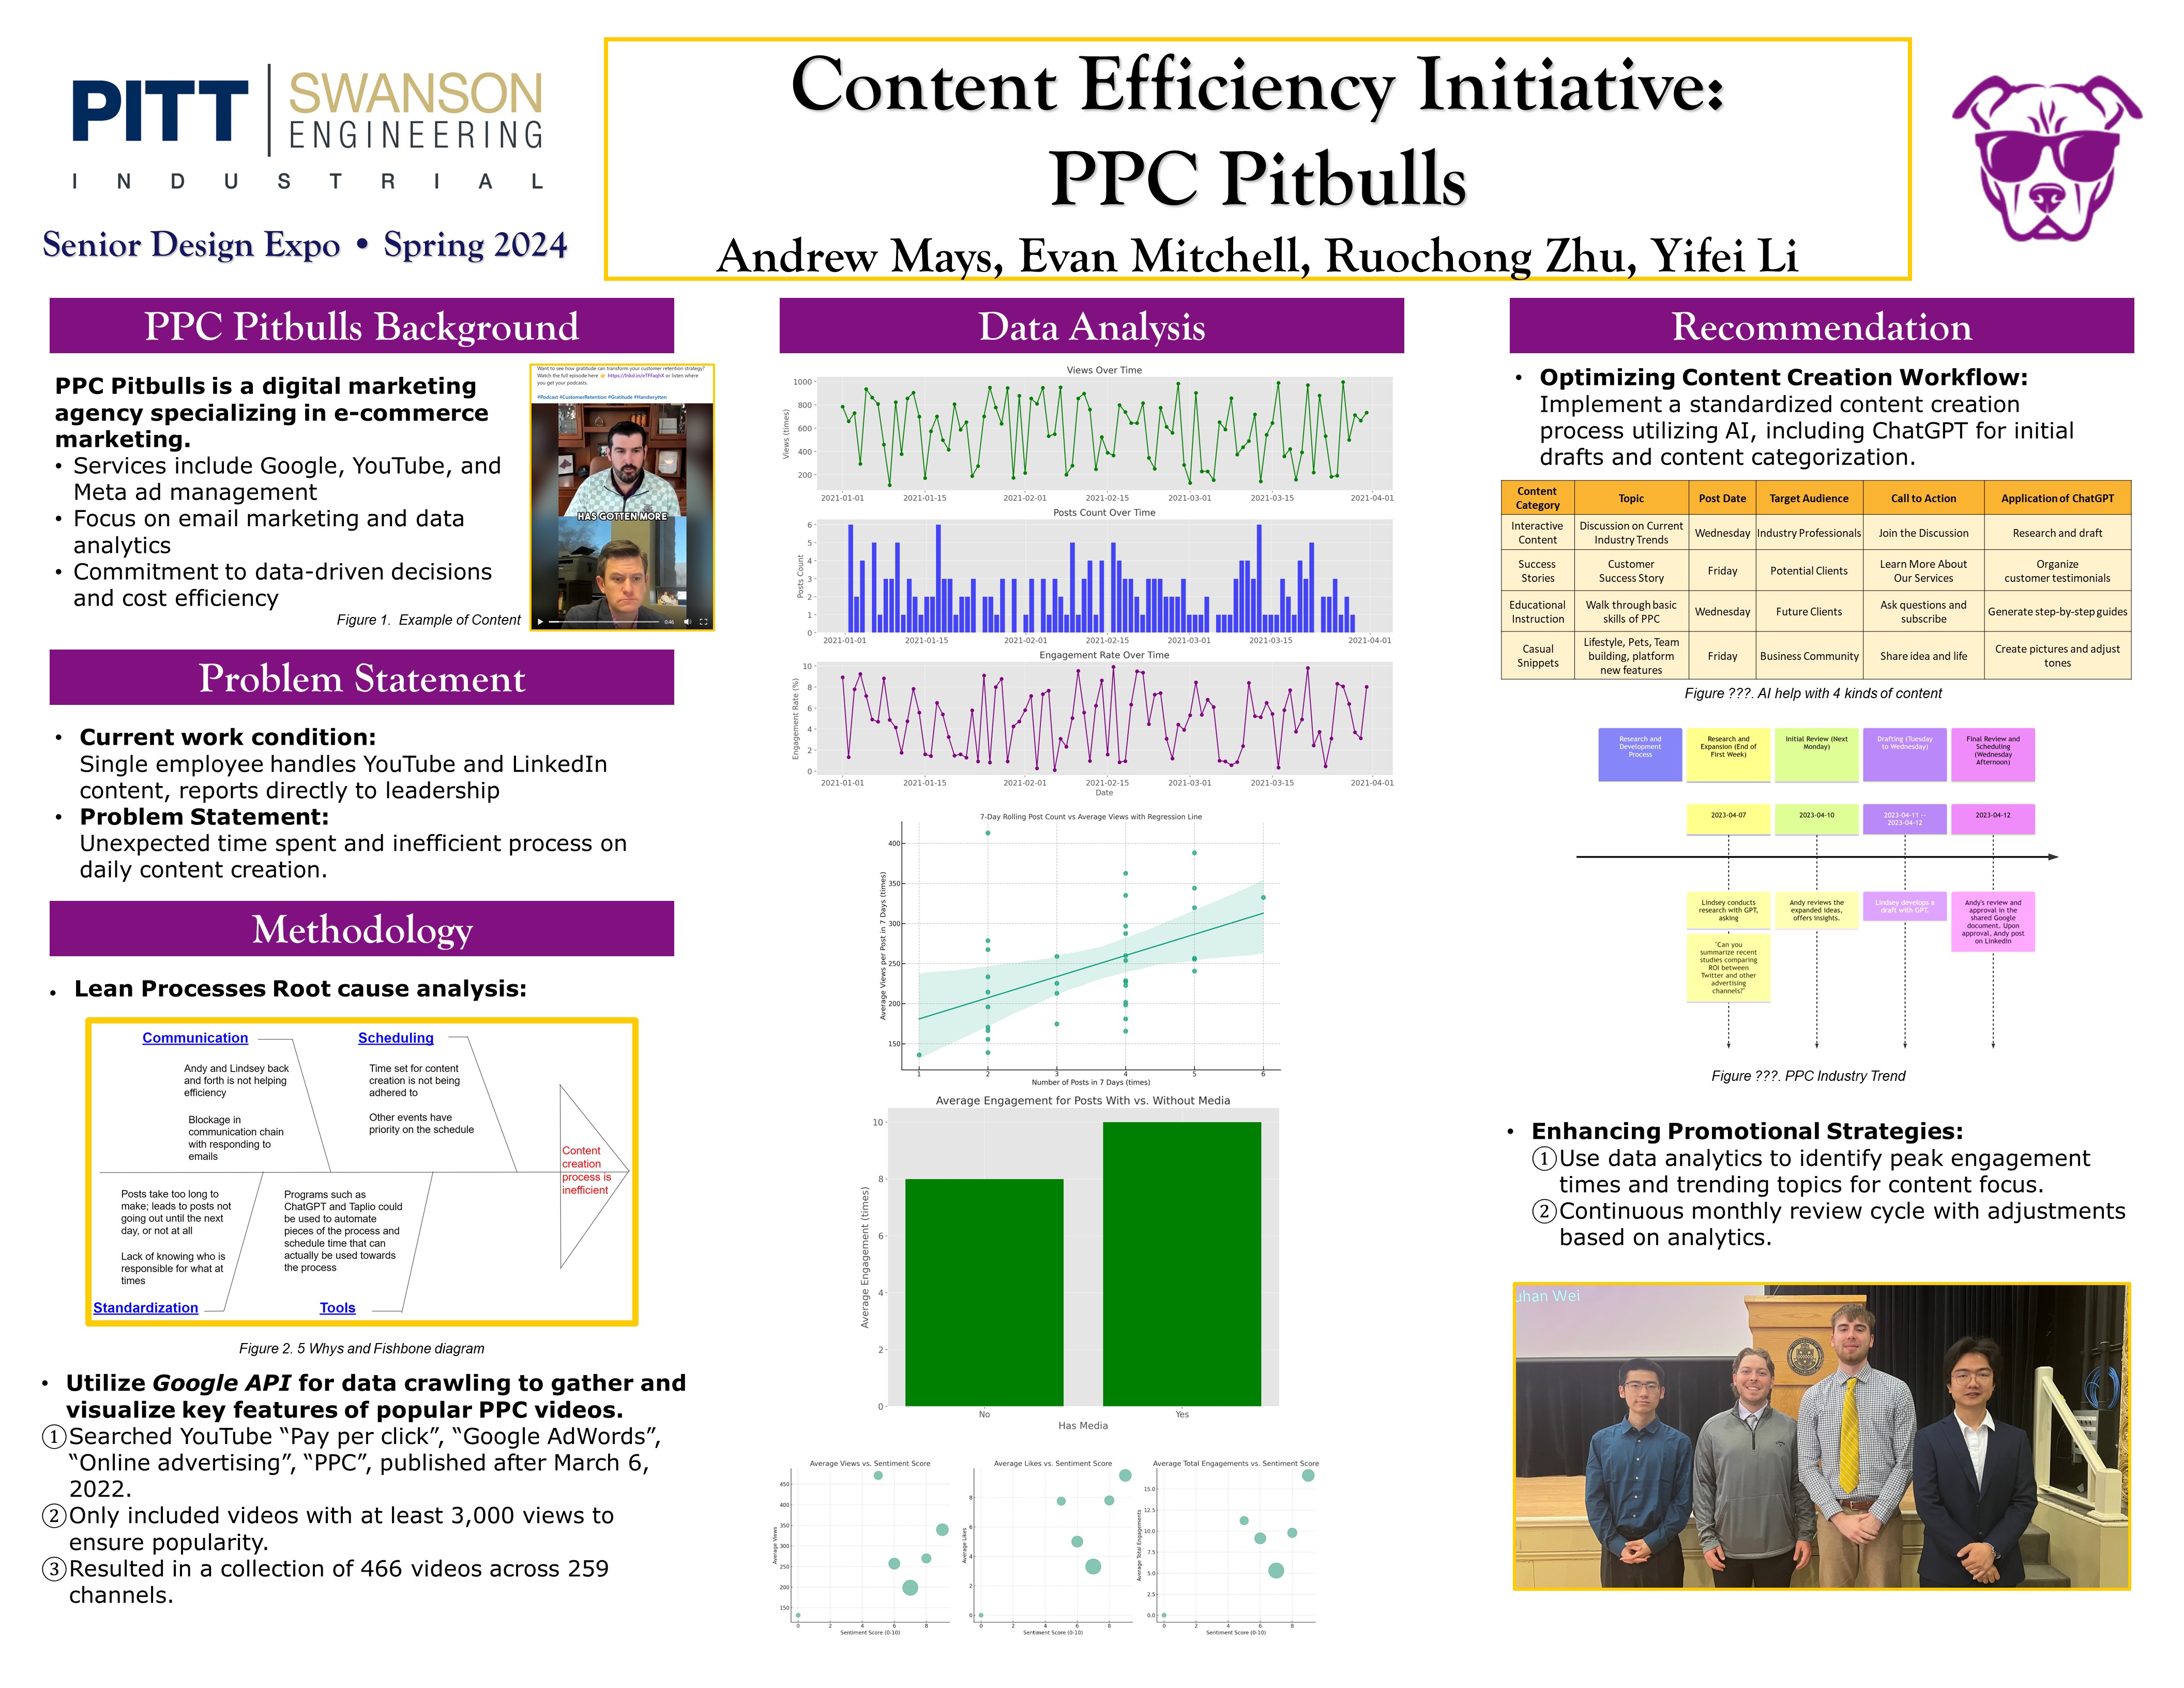 Content Efficiency Initiative:  PPC Pitbulls research poster overview showing the project